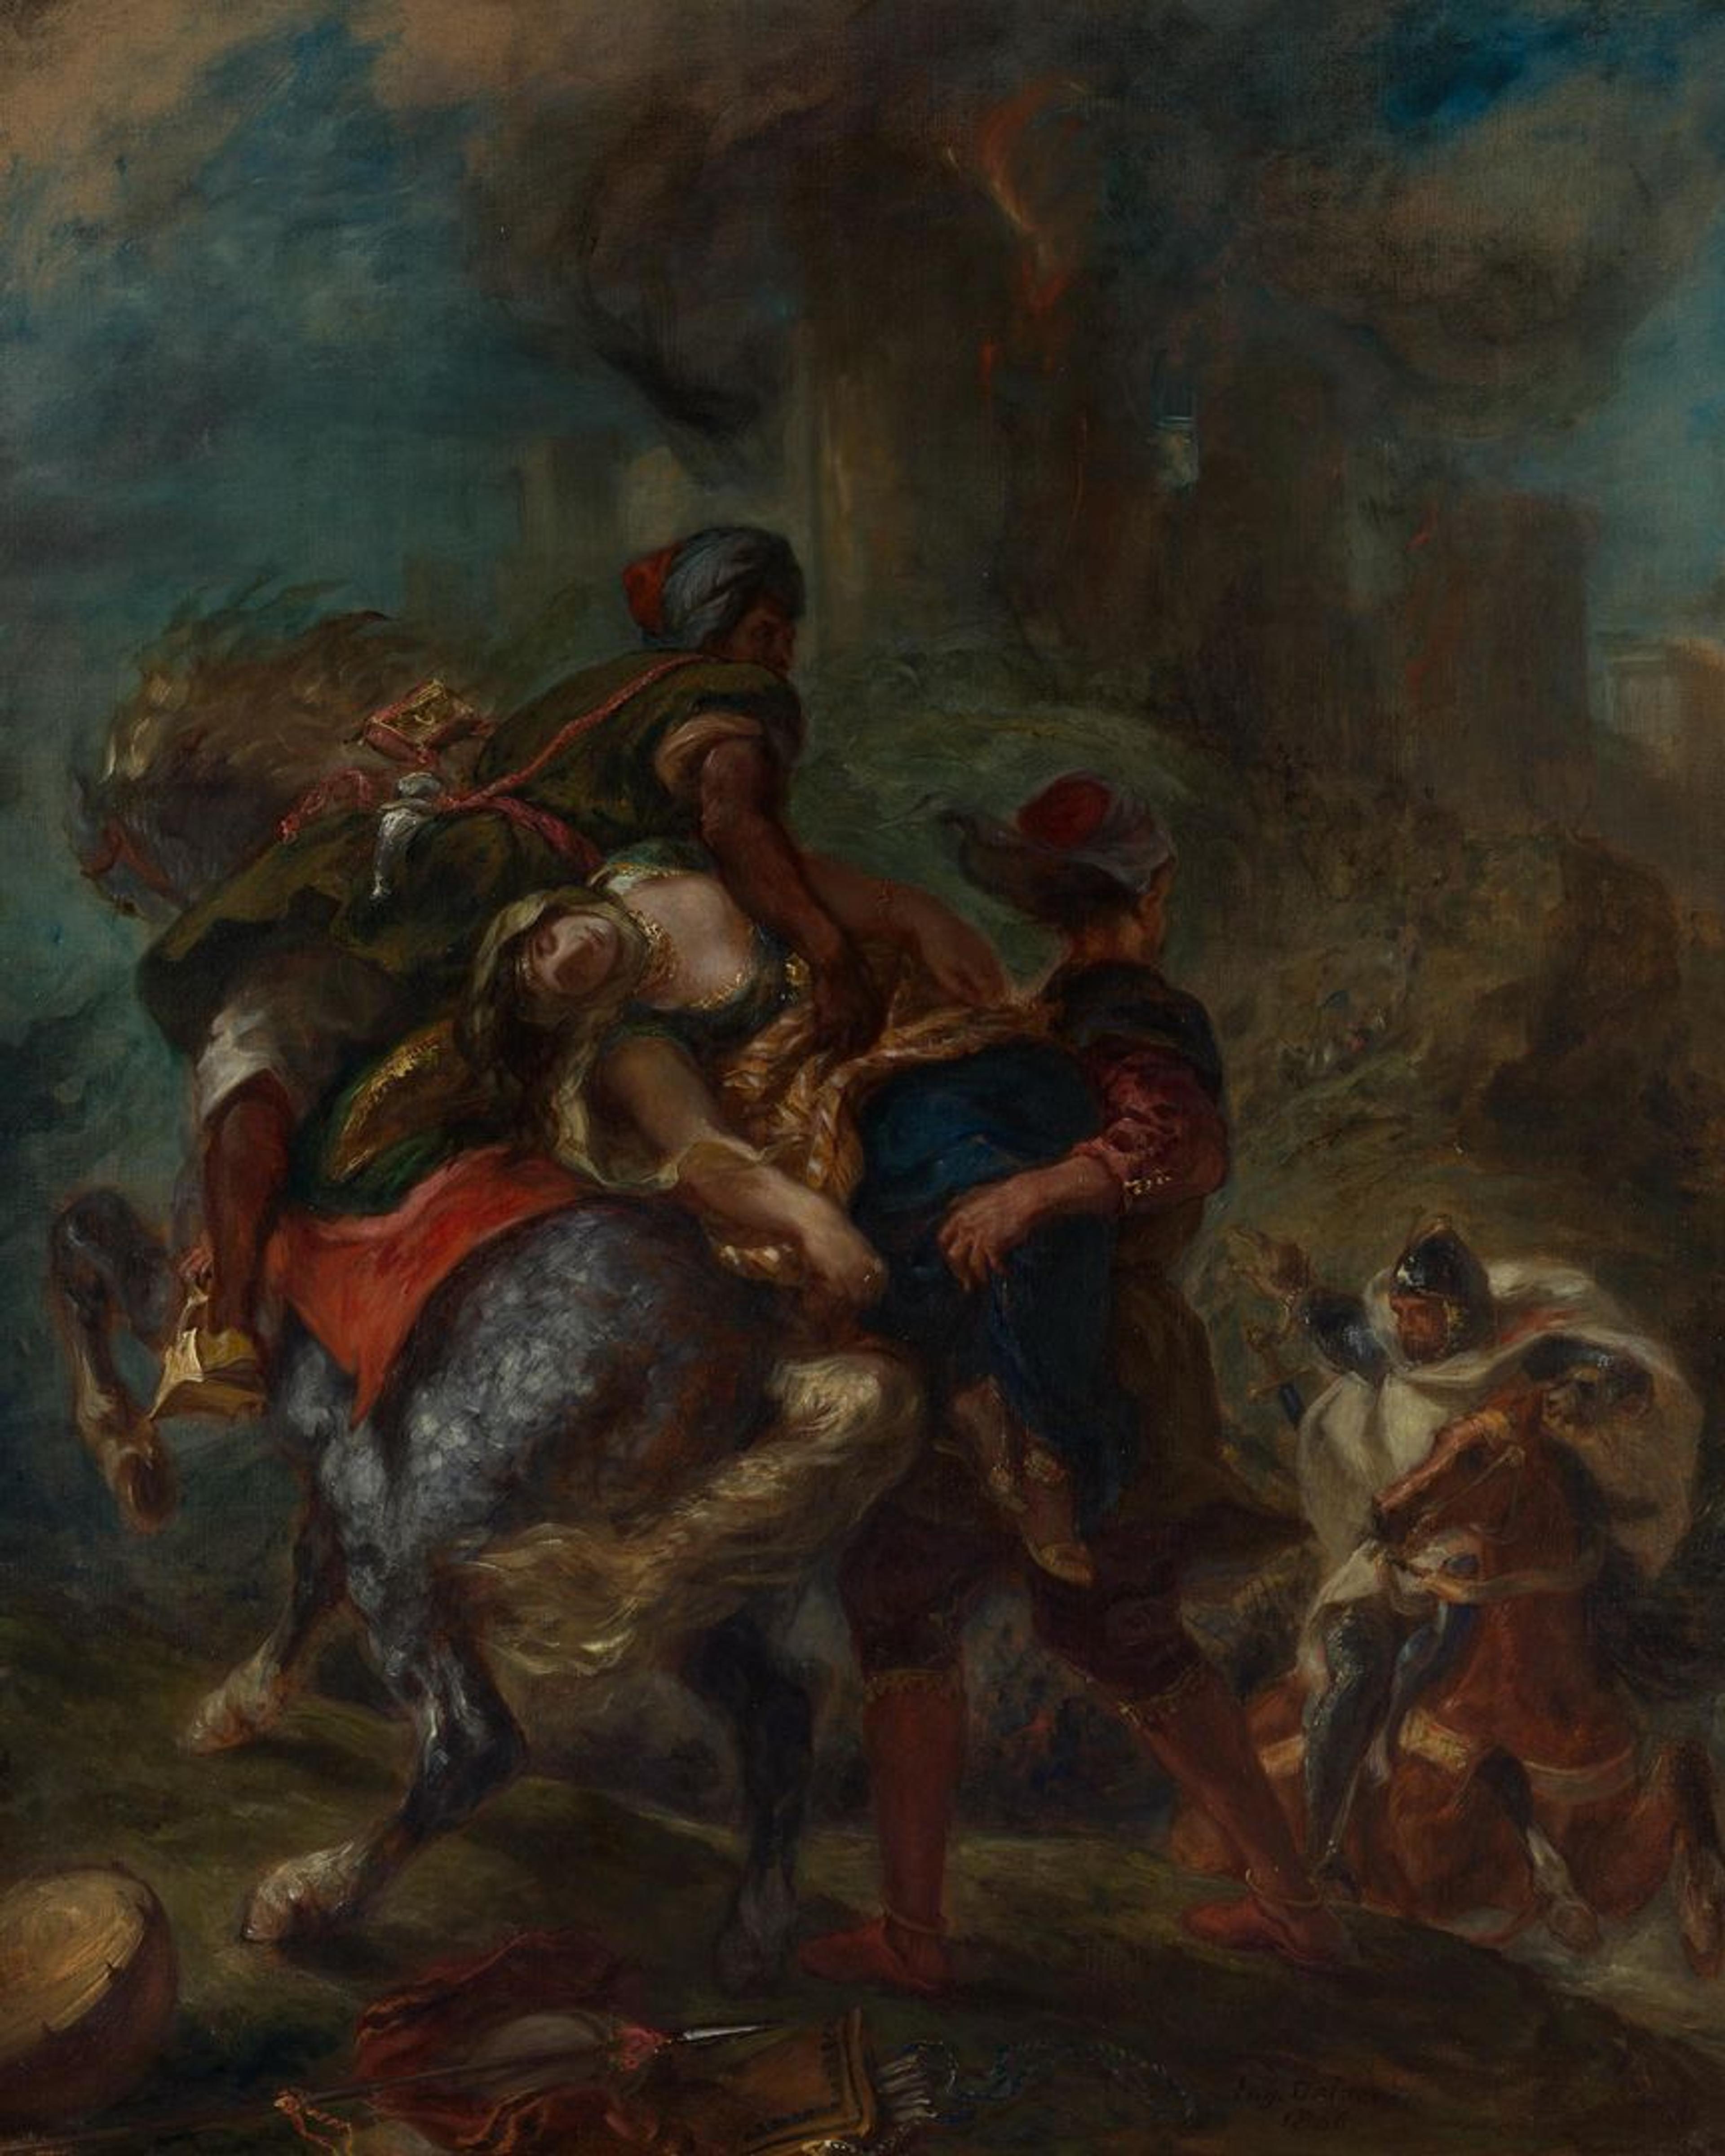 A monumental oil painting by Eugène Delacroix depicting the biblical tale of the Abduction of Rebecca